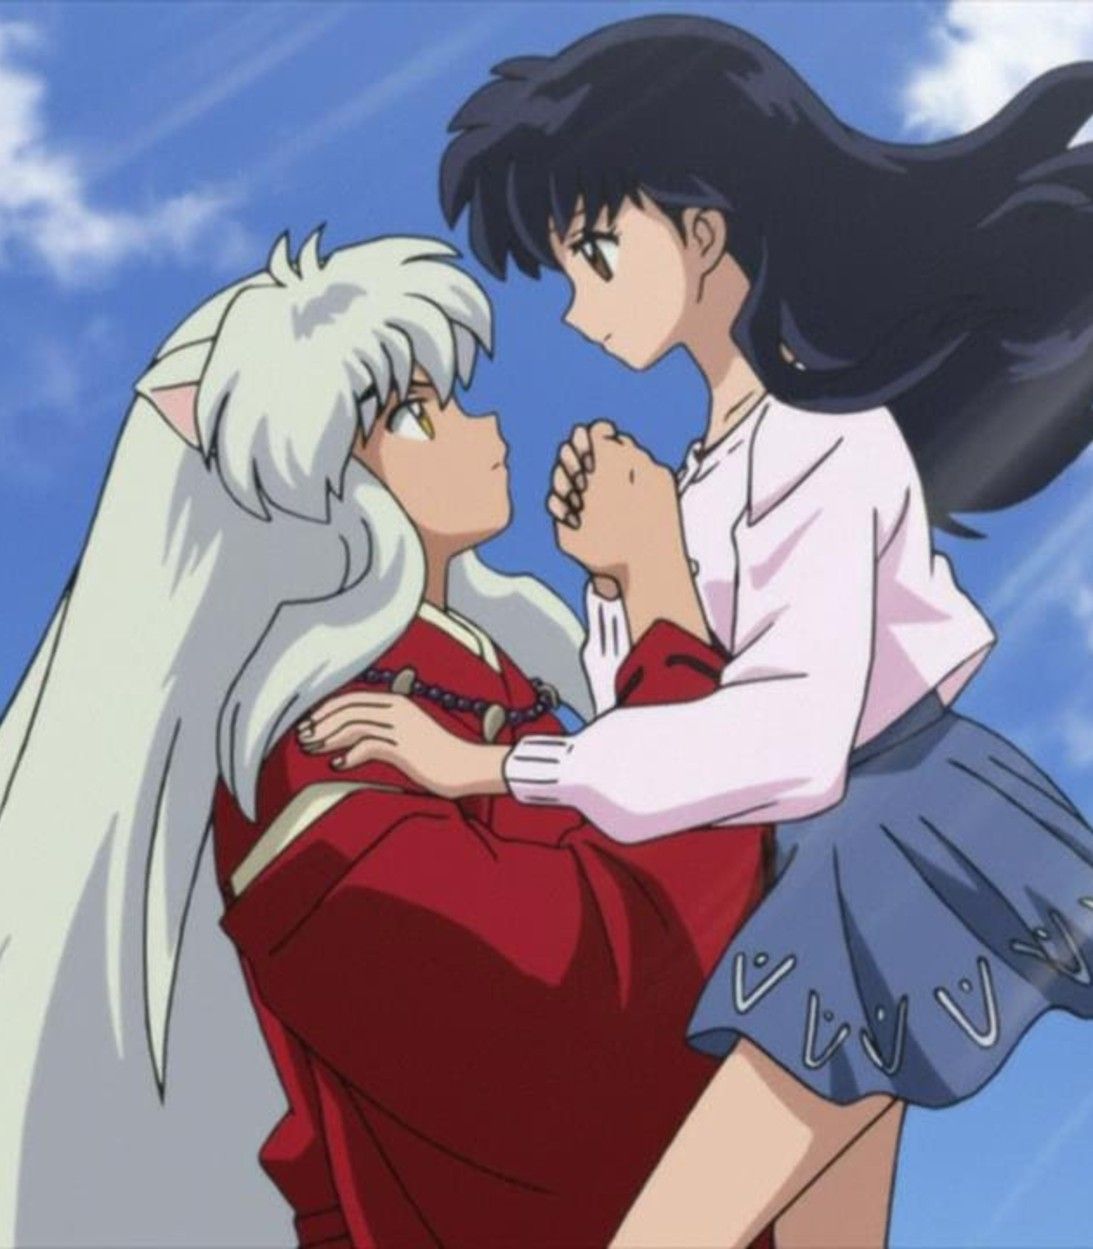 This is Inuyasha holding Kagome as he pulls her out of the well.